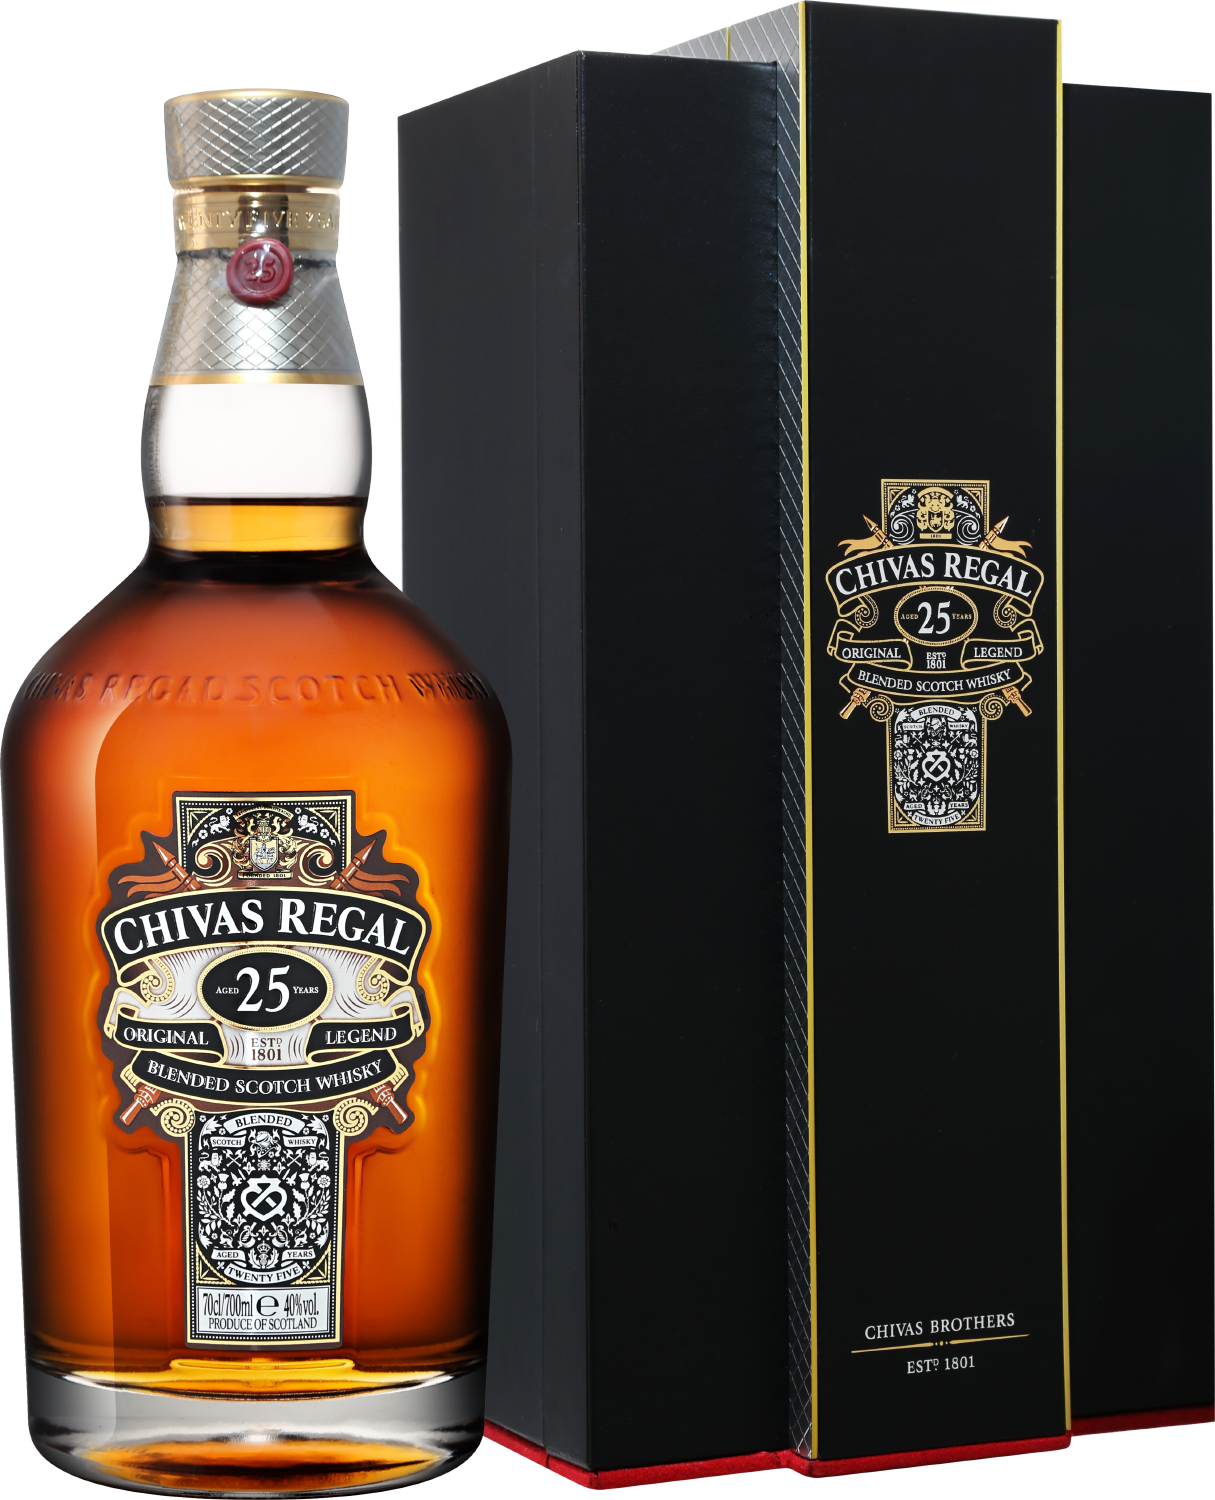 Chivas Regal Blended Scotch Whisky 25 y.o. (gift box) chivas regal blended scotch whisky 12 y o gift box